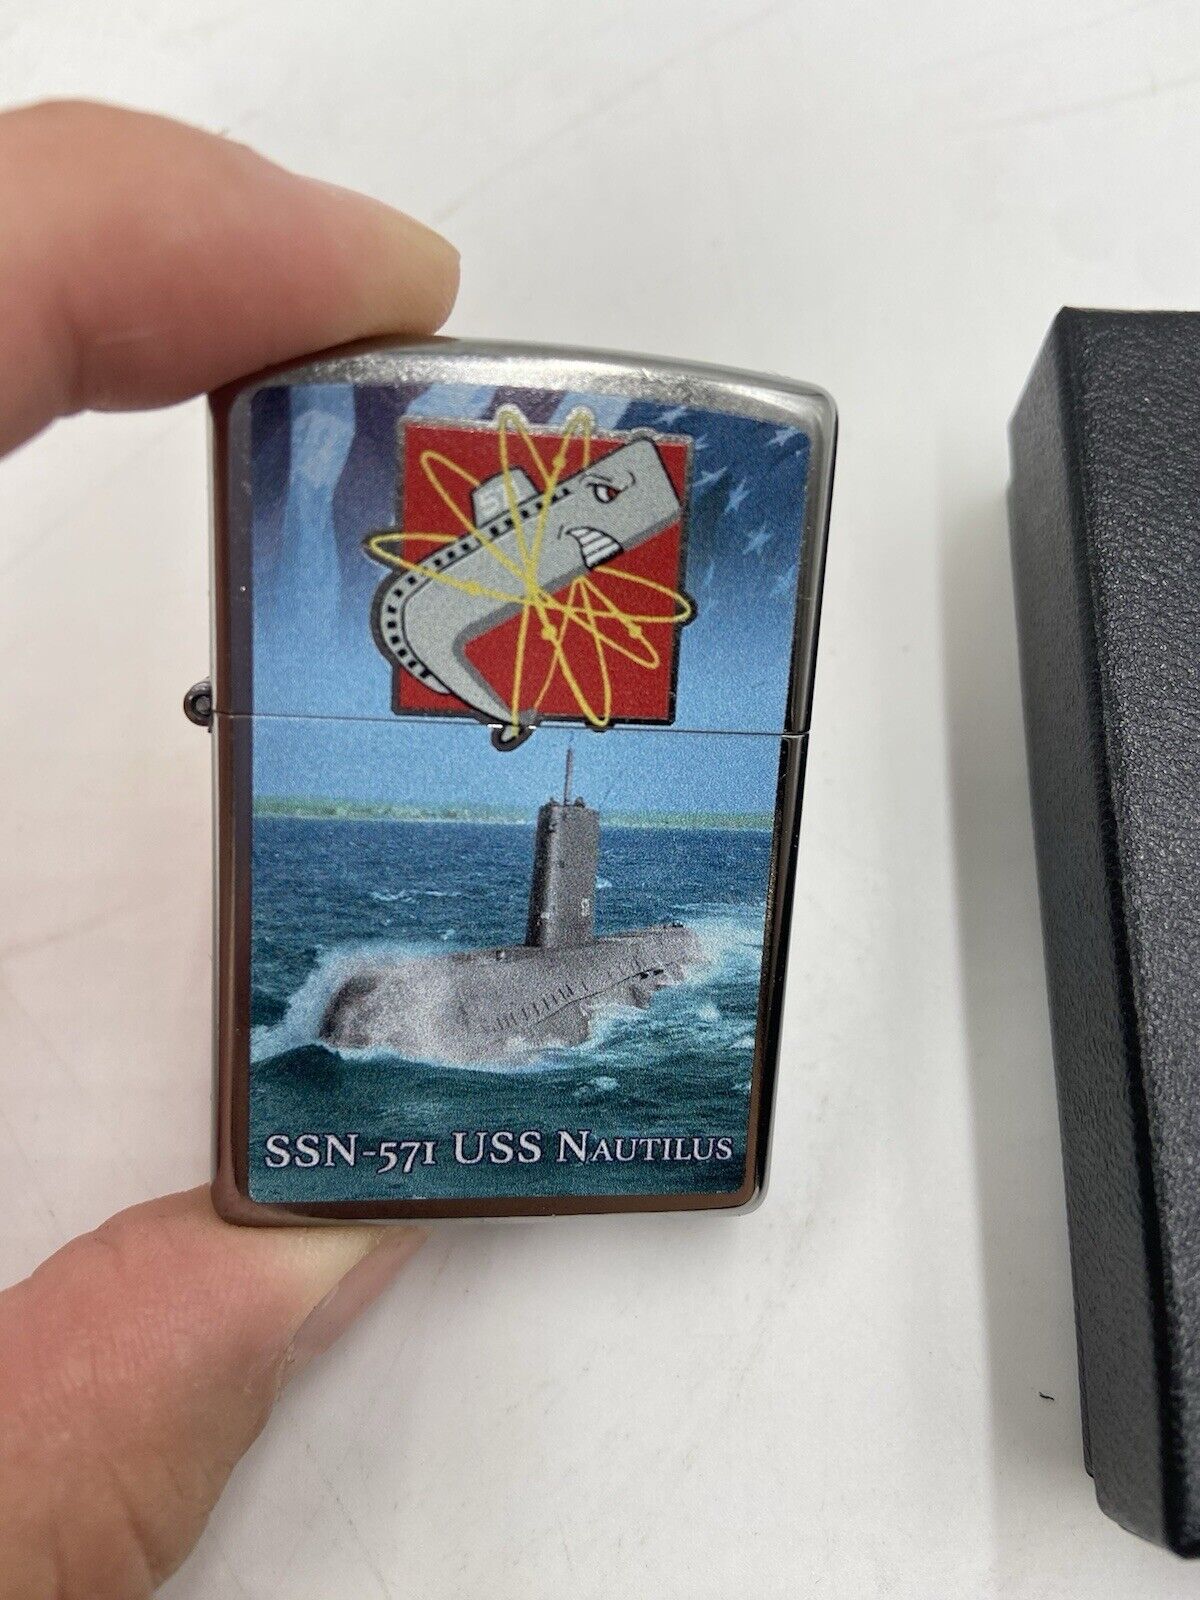 United States Navy “USS Nautilus” Official Zippo Lighter New In Box Unfired